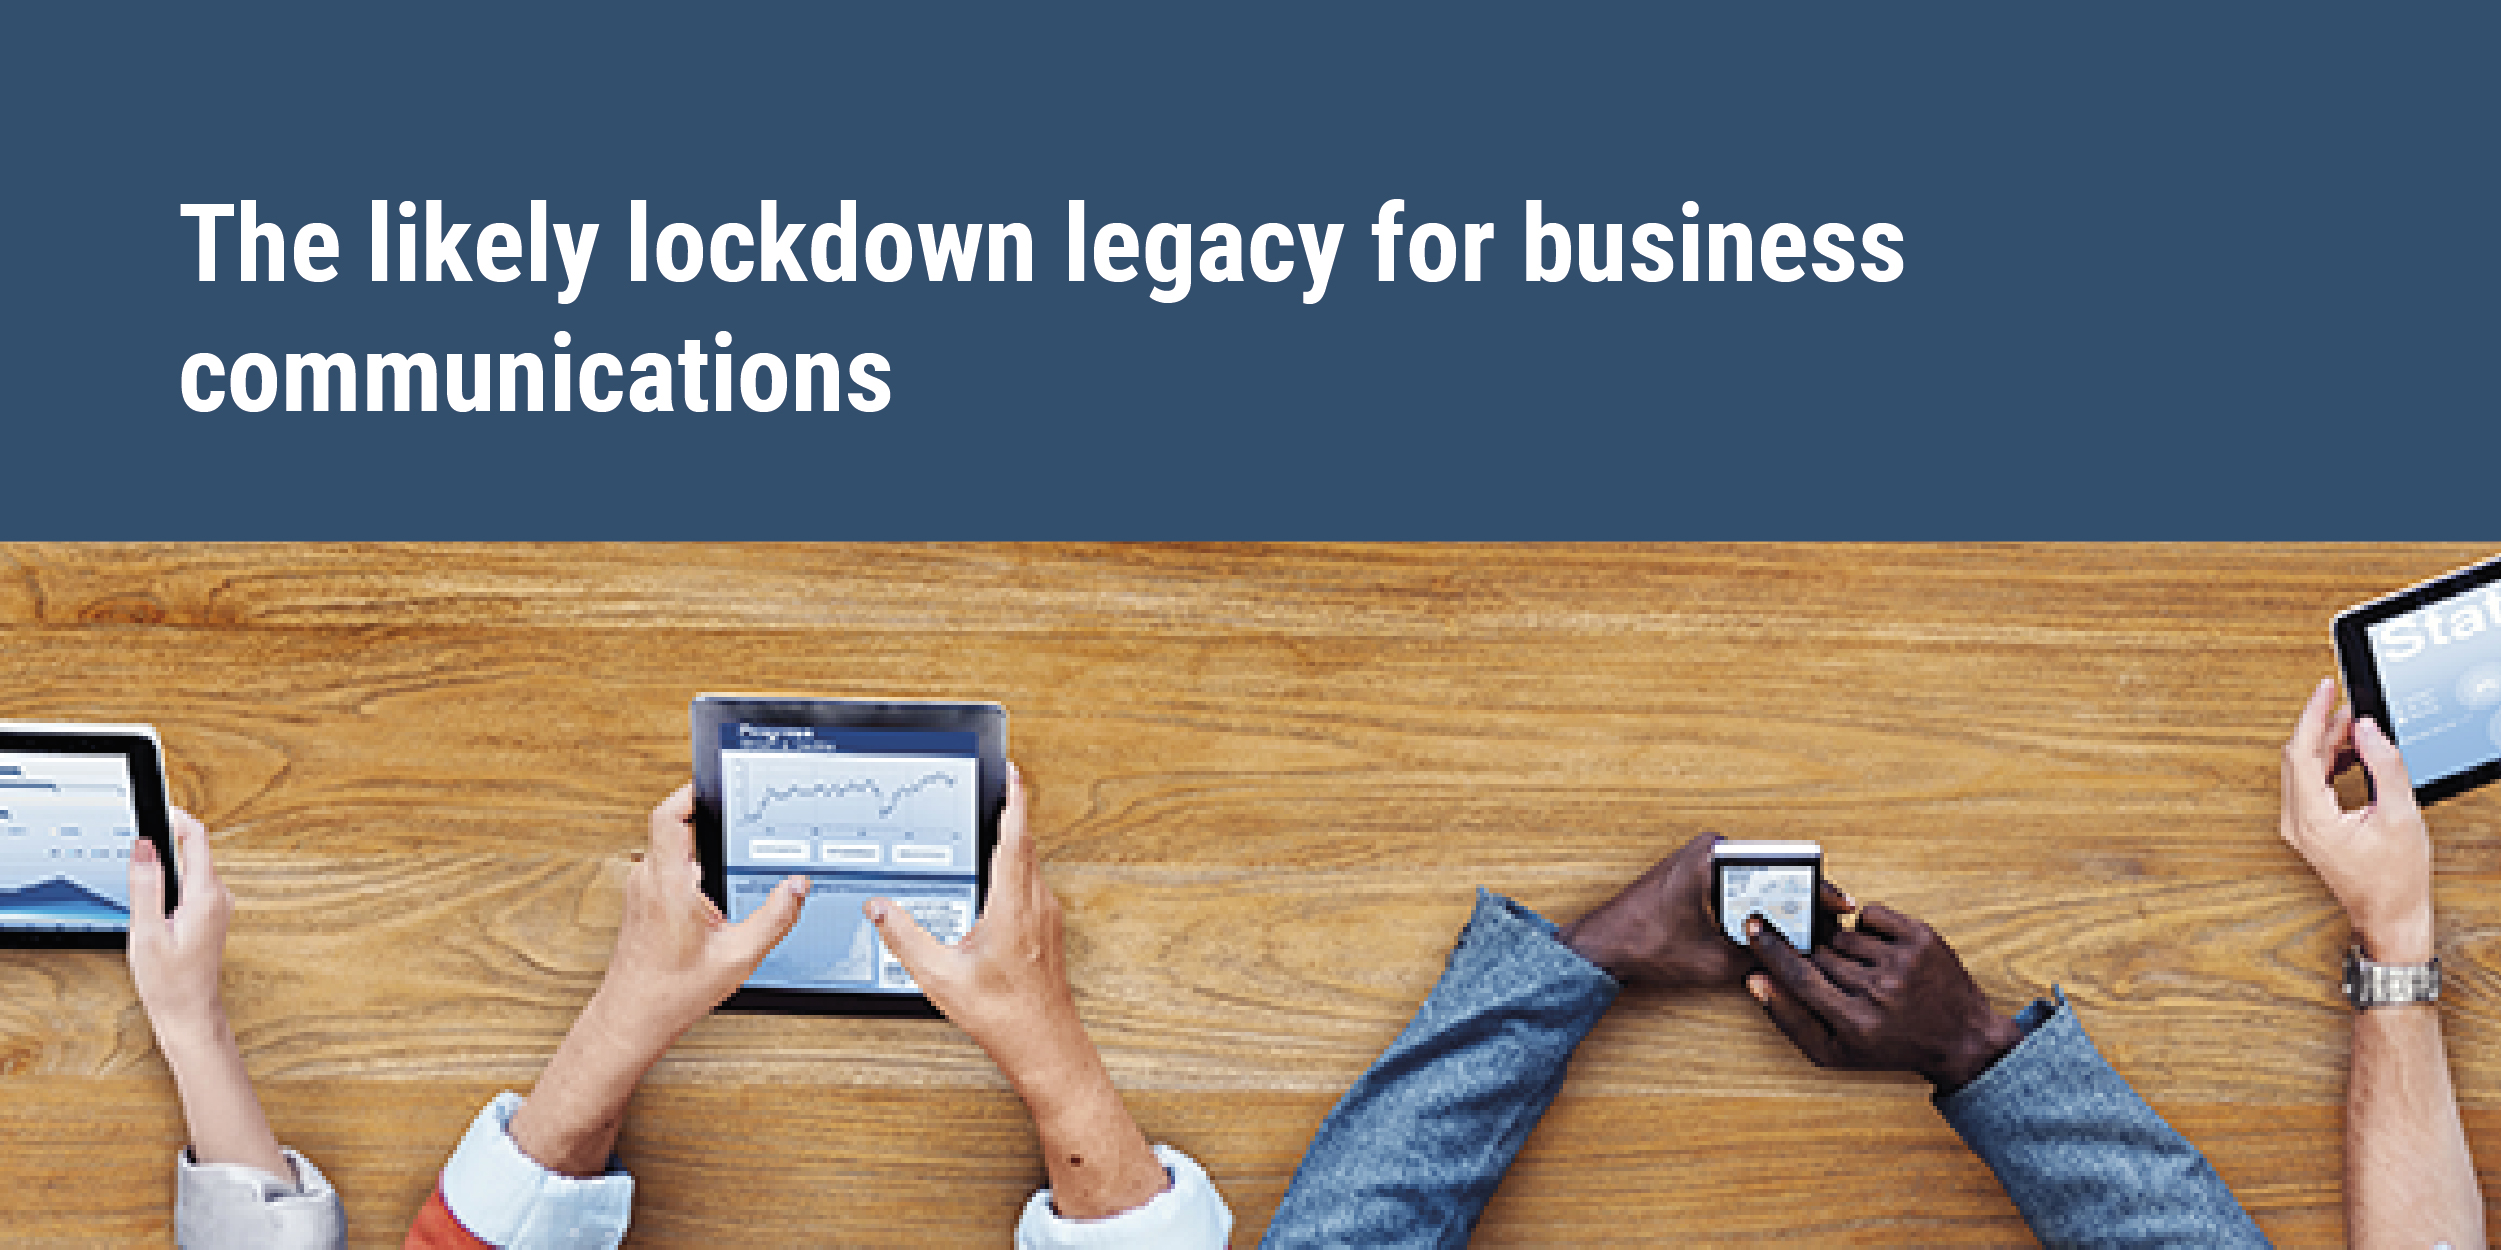 The likely lockdown legacy for business communications -staff on mobile devices